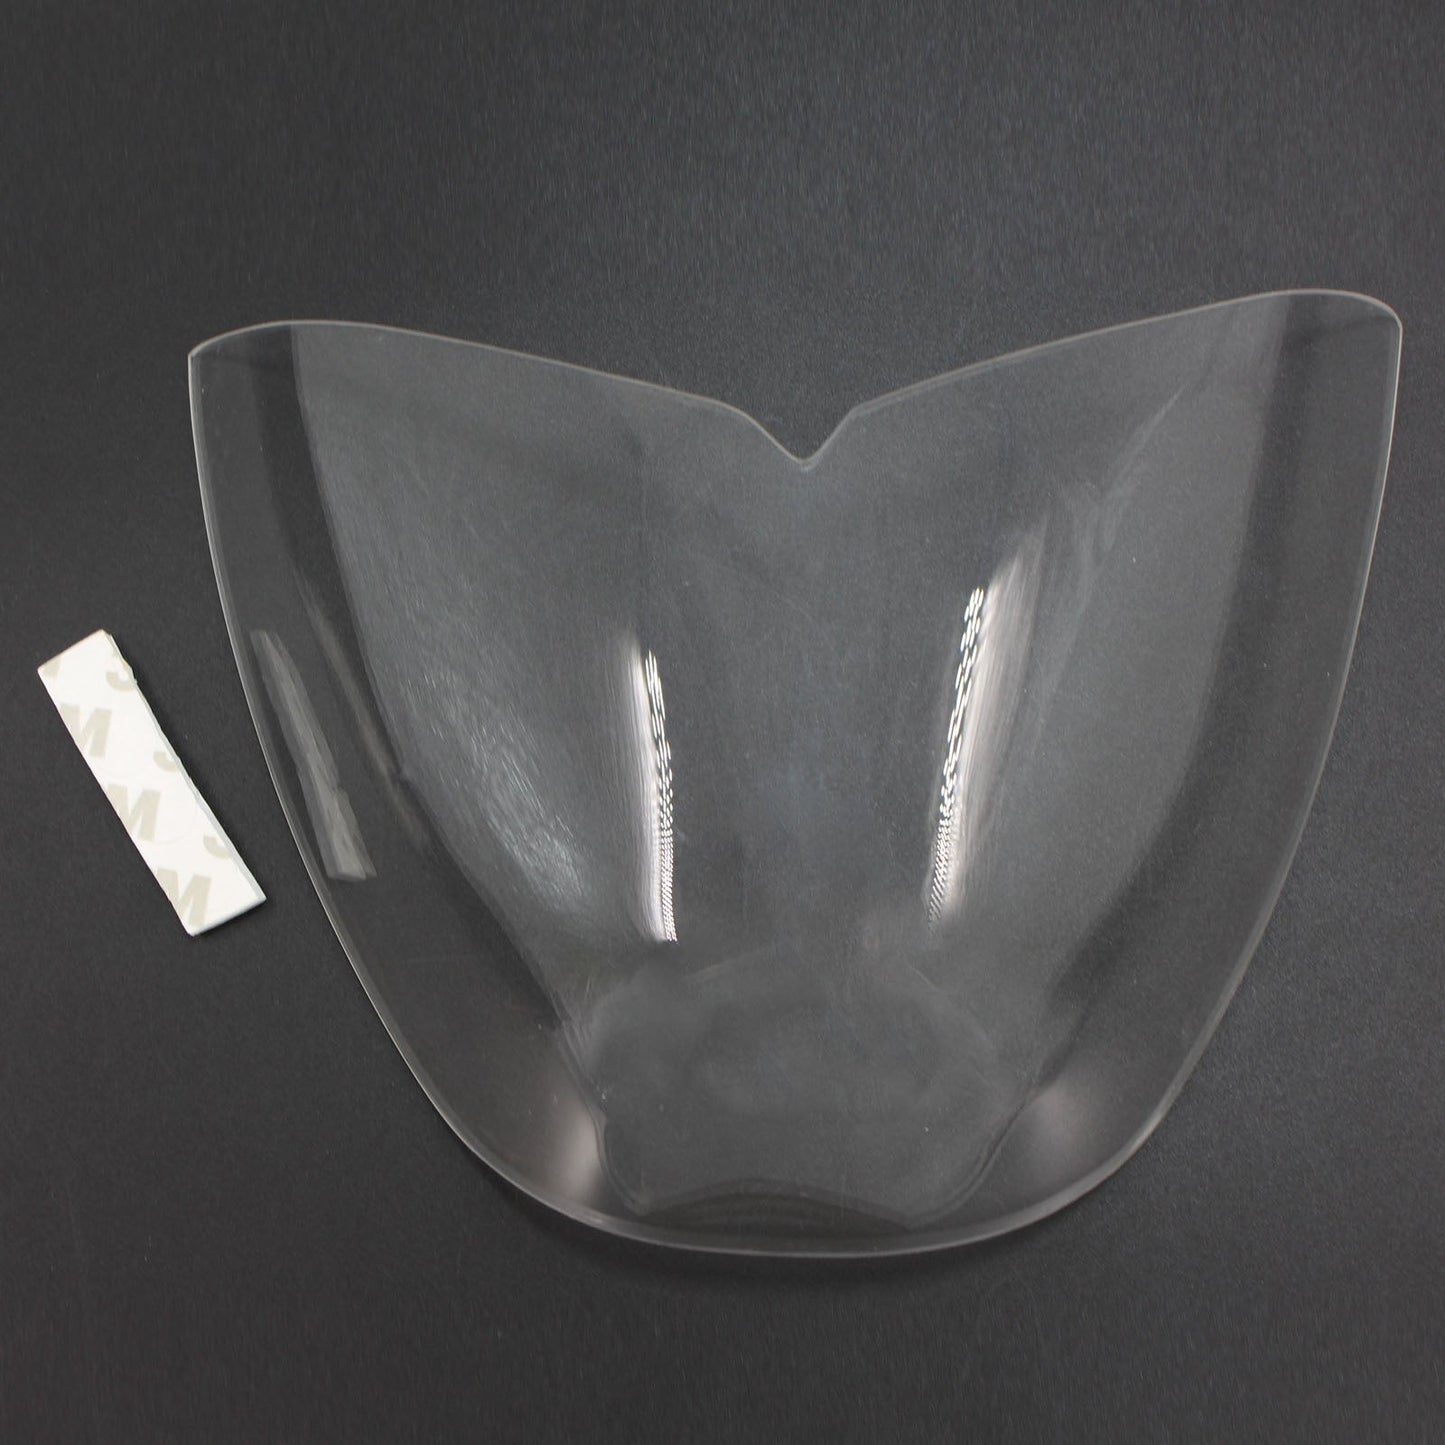 Front Headlight Lens Protection Cover Clear For Yamaha Mt-25 15-21 Mt-03 15-19